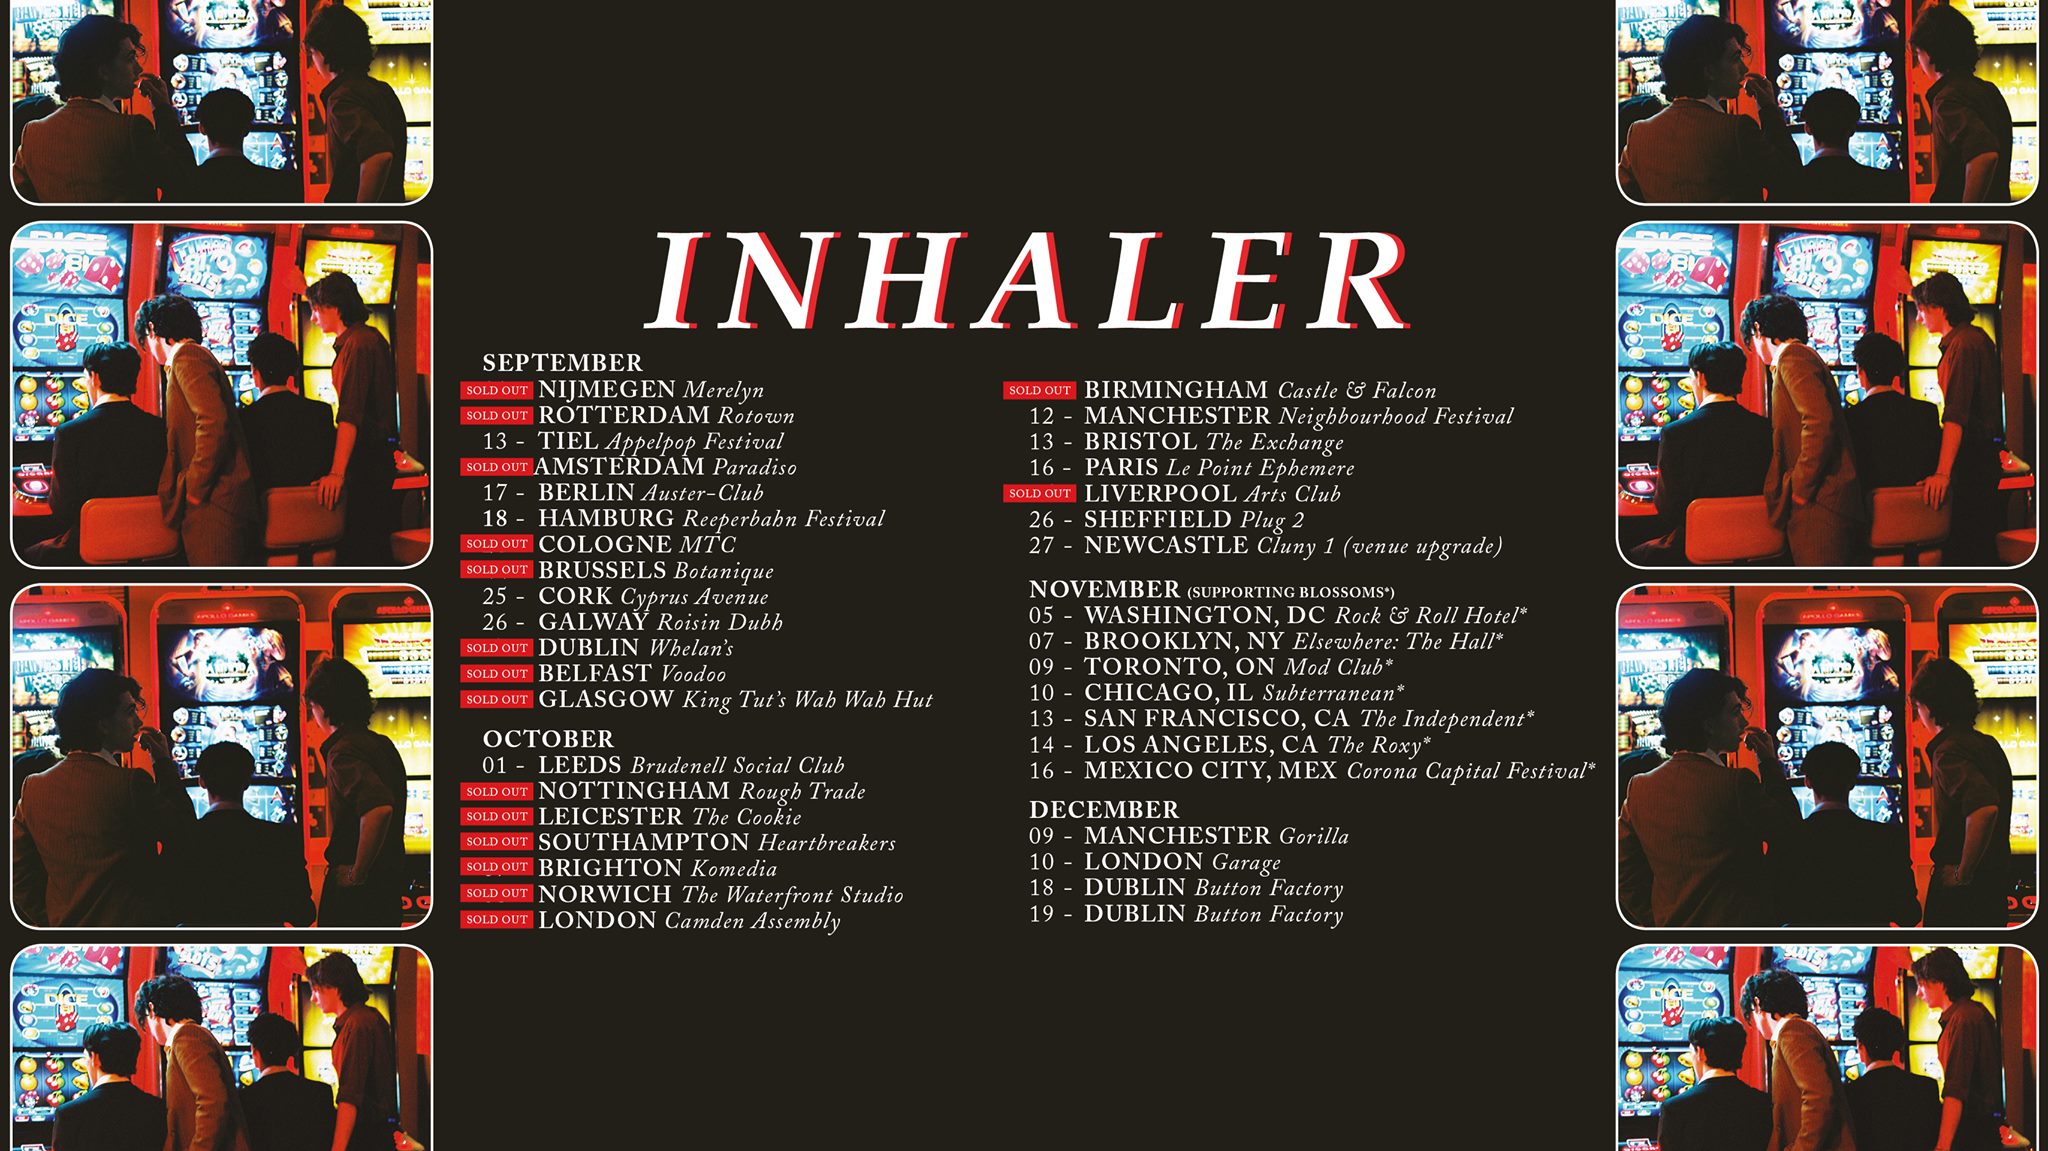 How to catch Irish rock band Inhaler on tour FLAVOURMAG